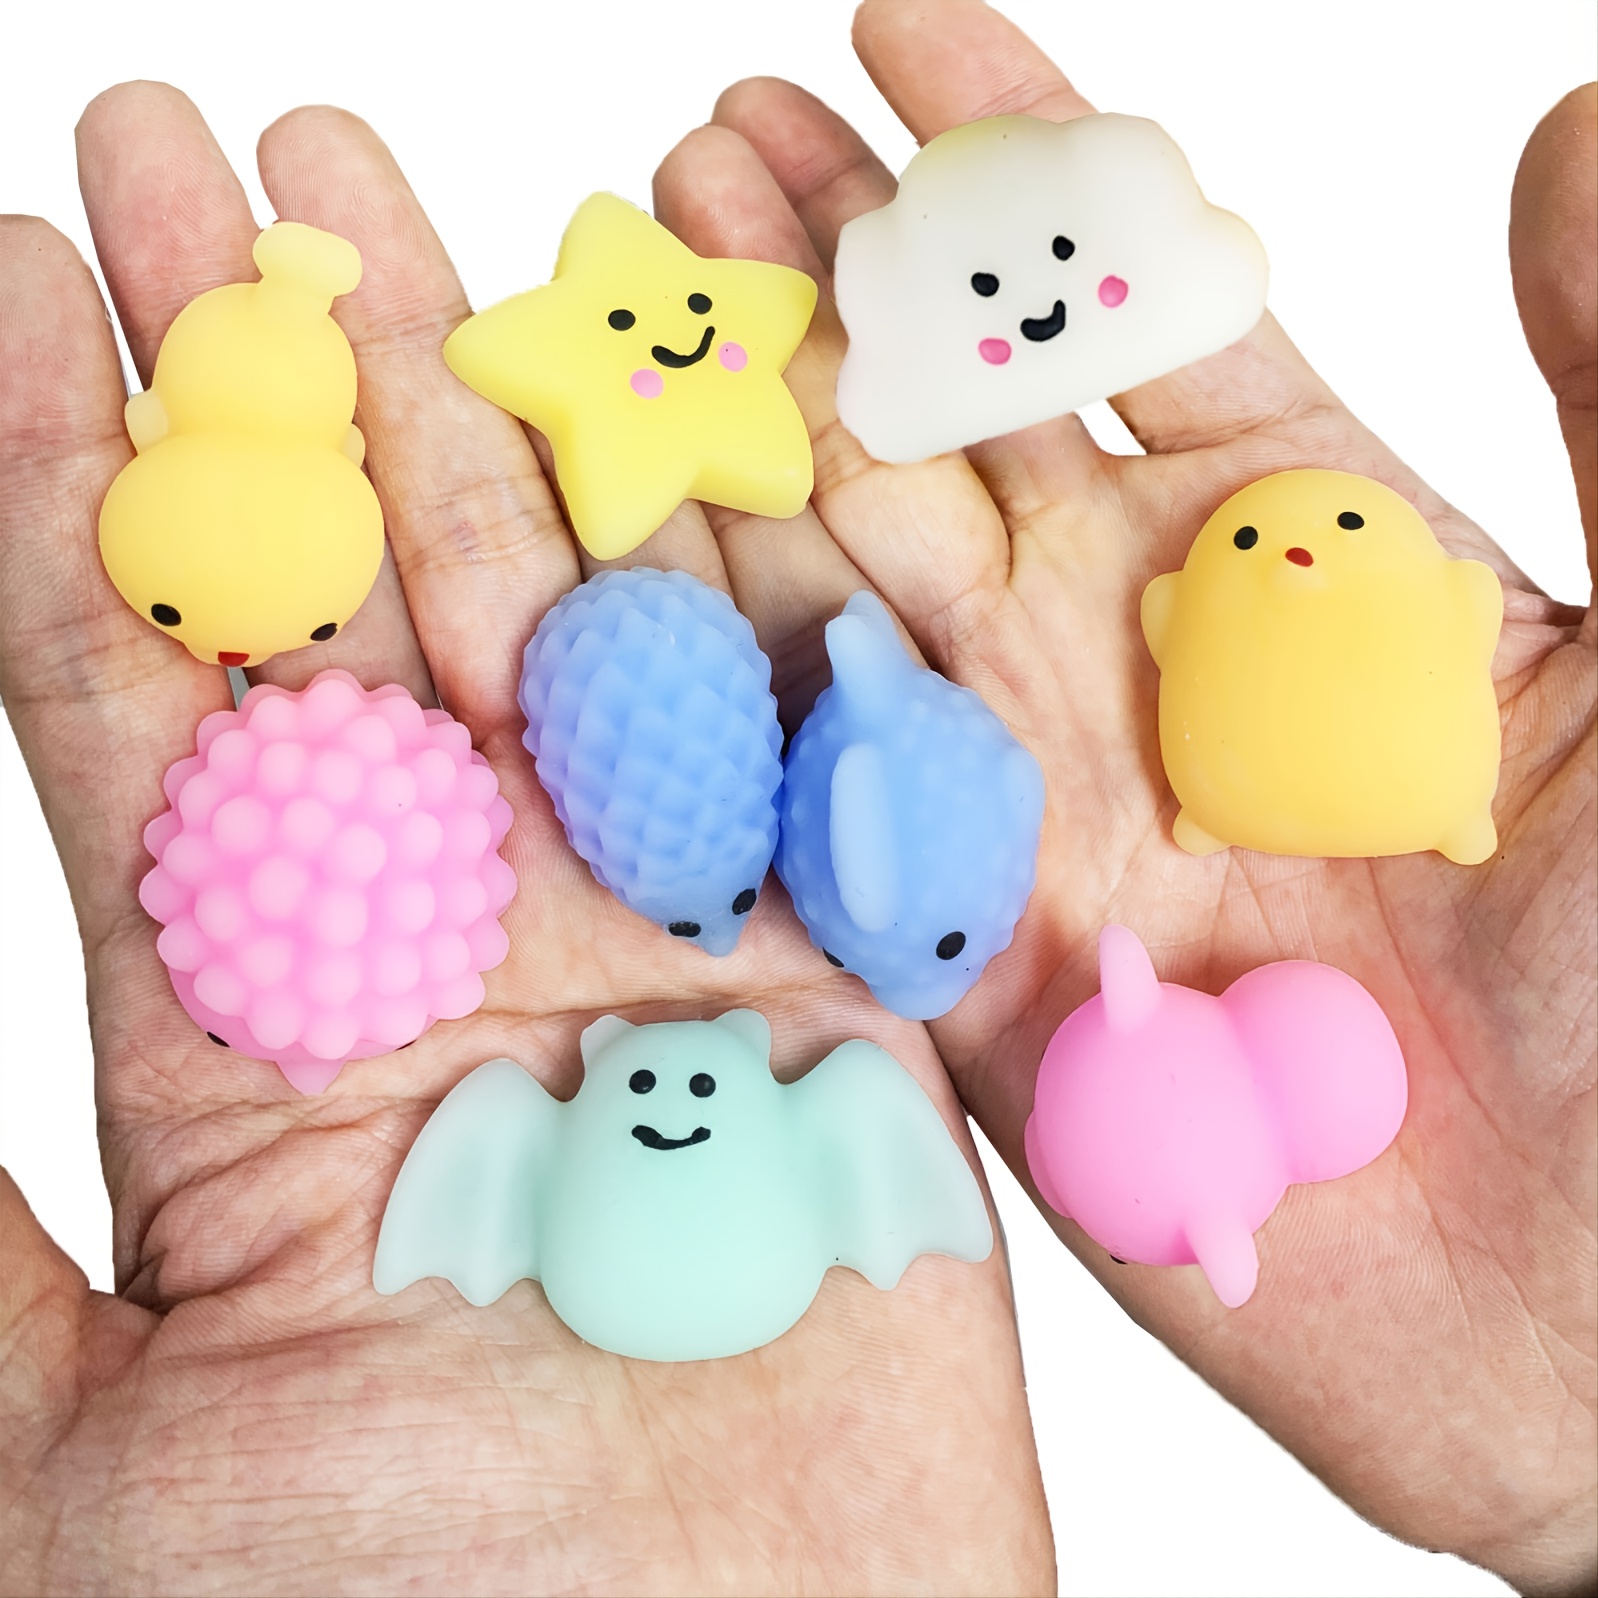 Set of 6 Dog Mochi Squishy Animals - Kawaii - Cute Individually Boxed Wrapped Toys - Sensory, Stress, Fidget Party Favor Toy